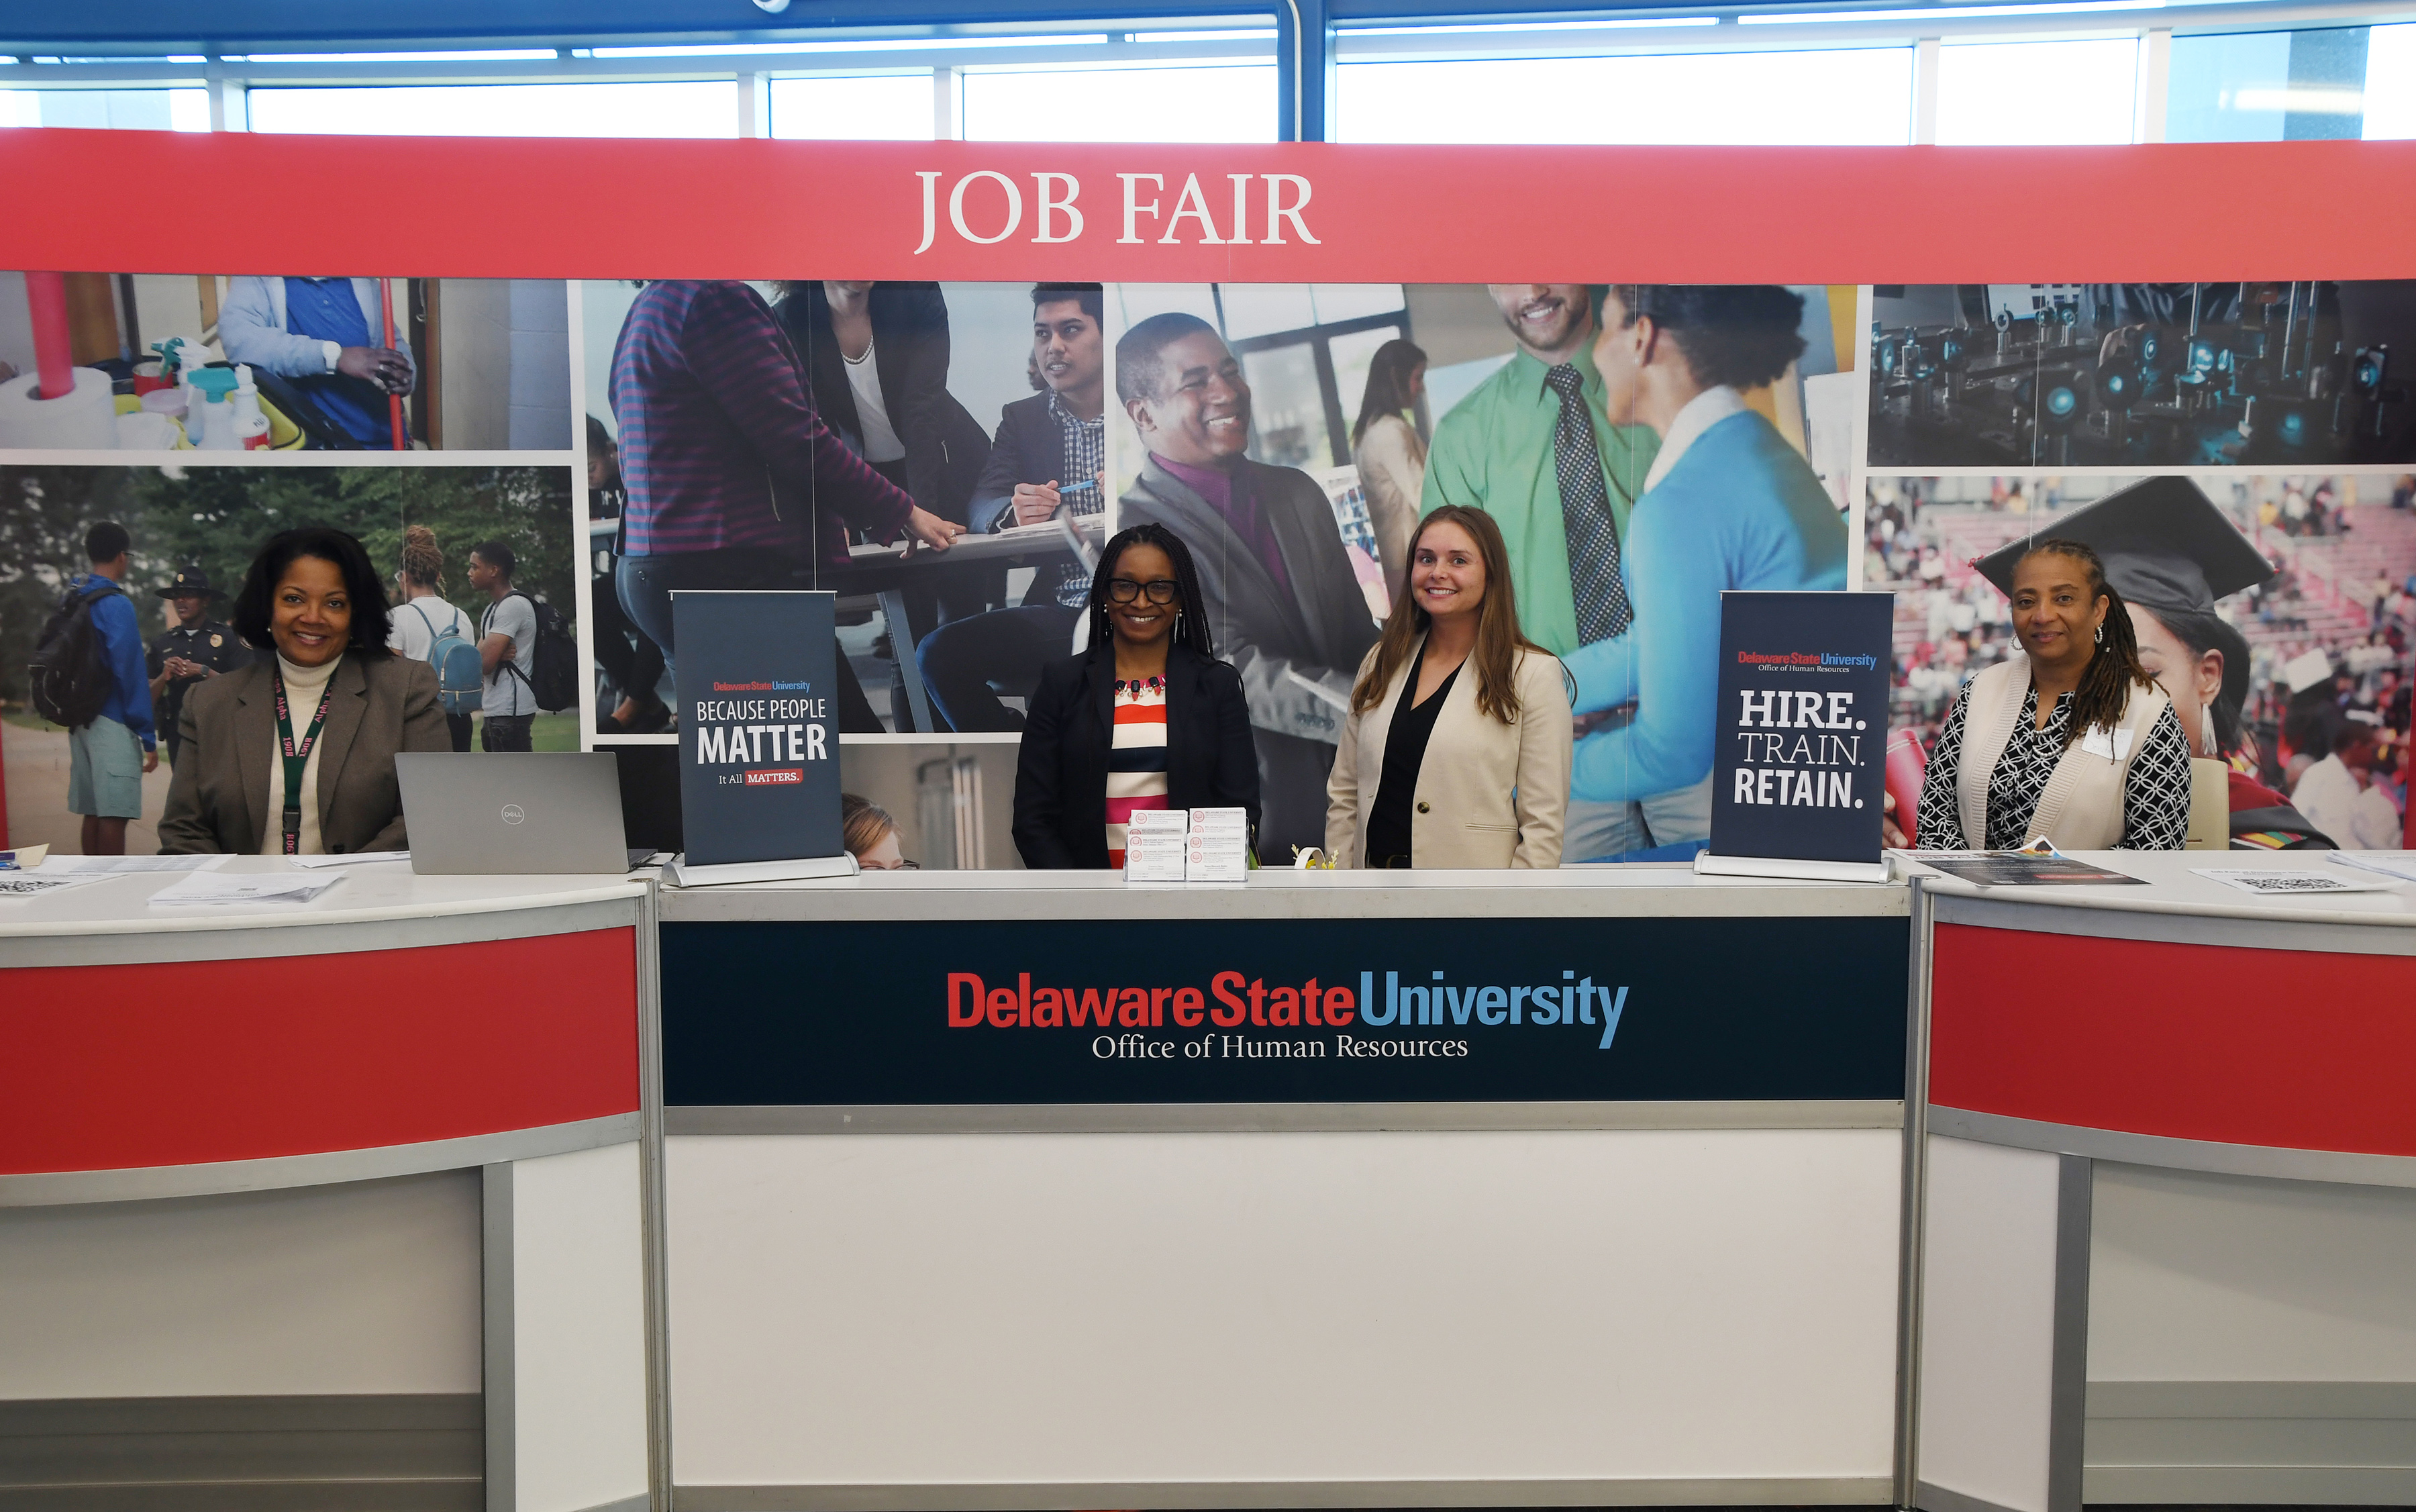 The 2022 Spring Job Fair provided attendees with an overview of some of the job positions currently open at Delaware State University.